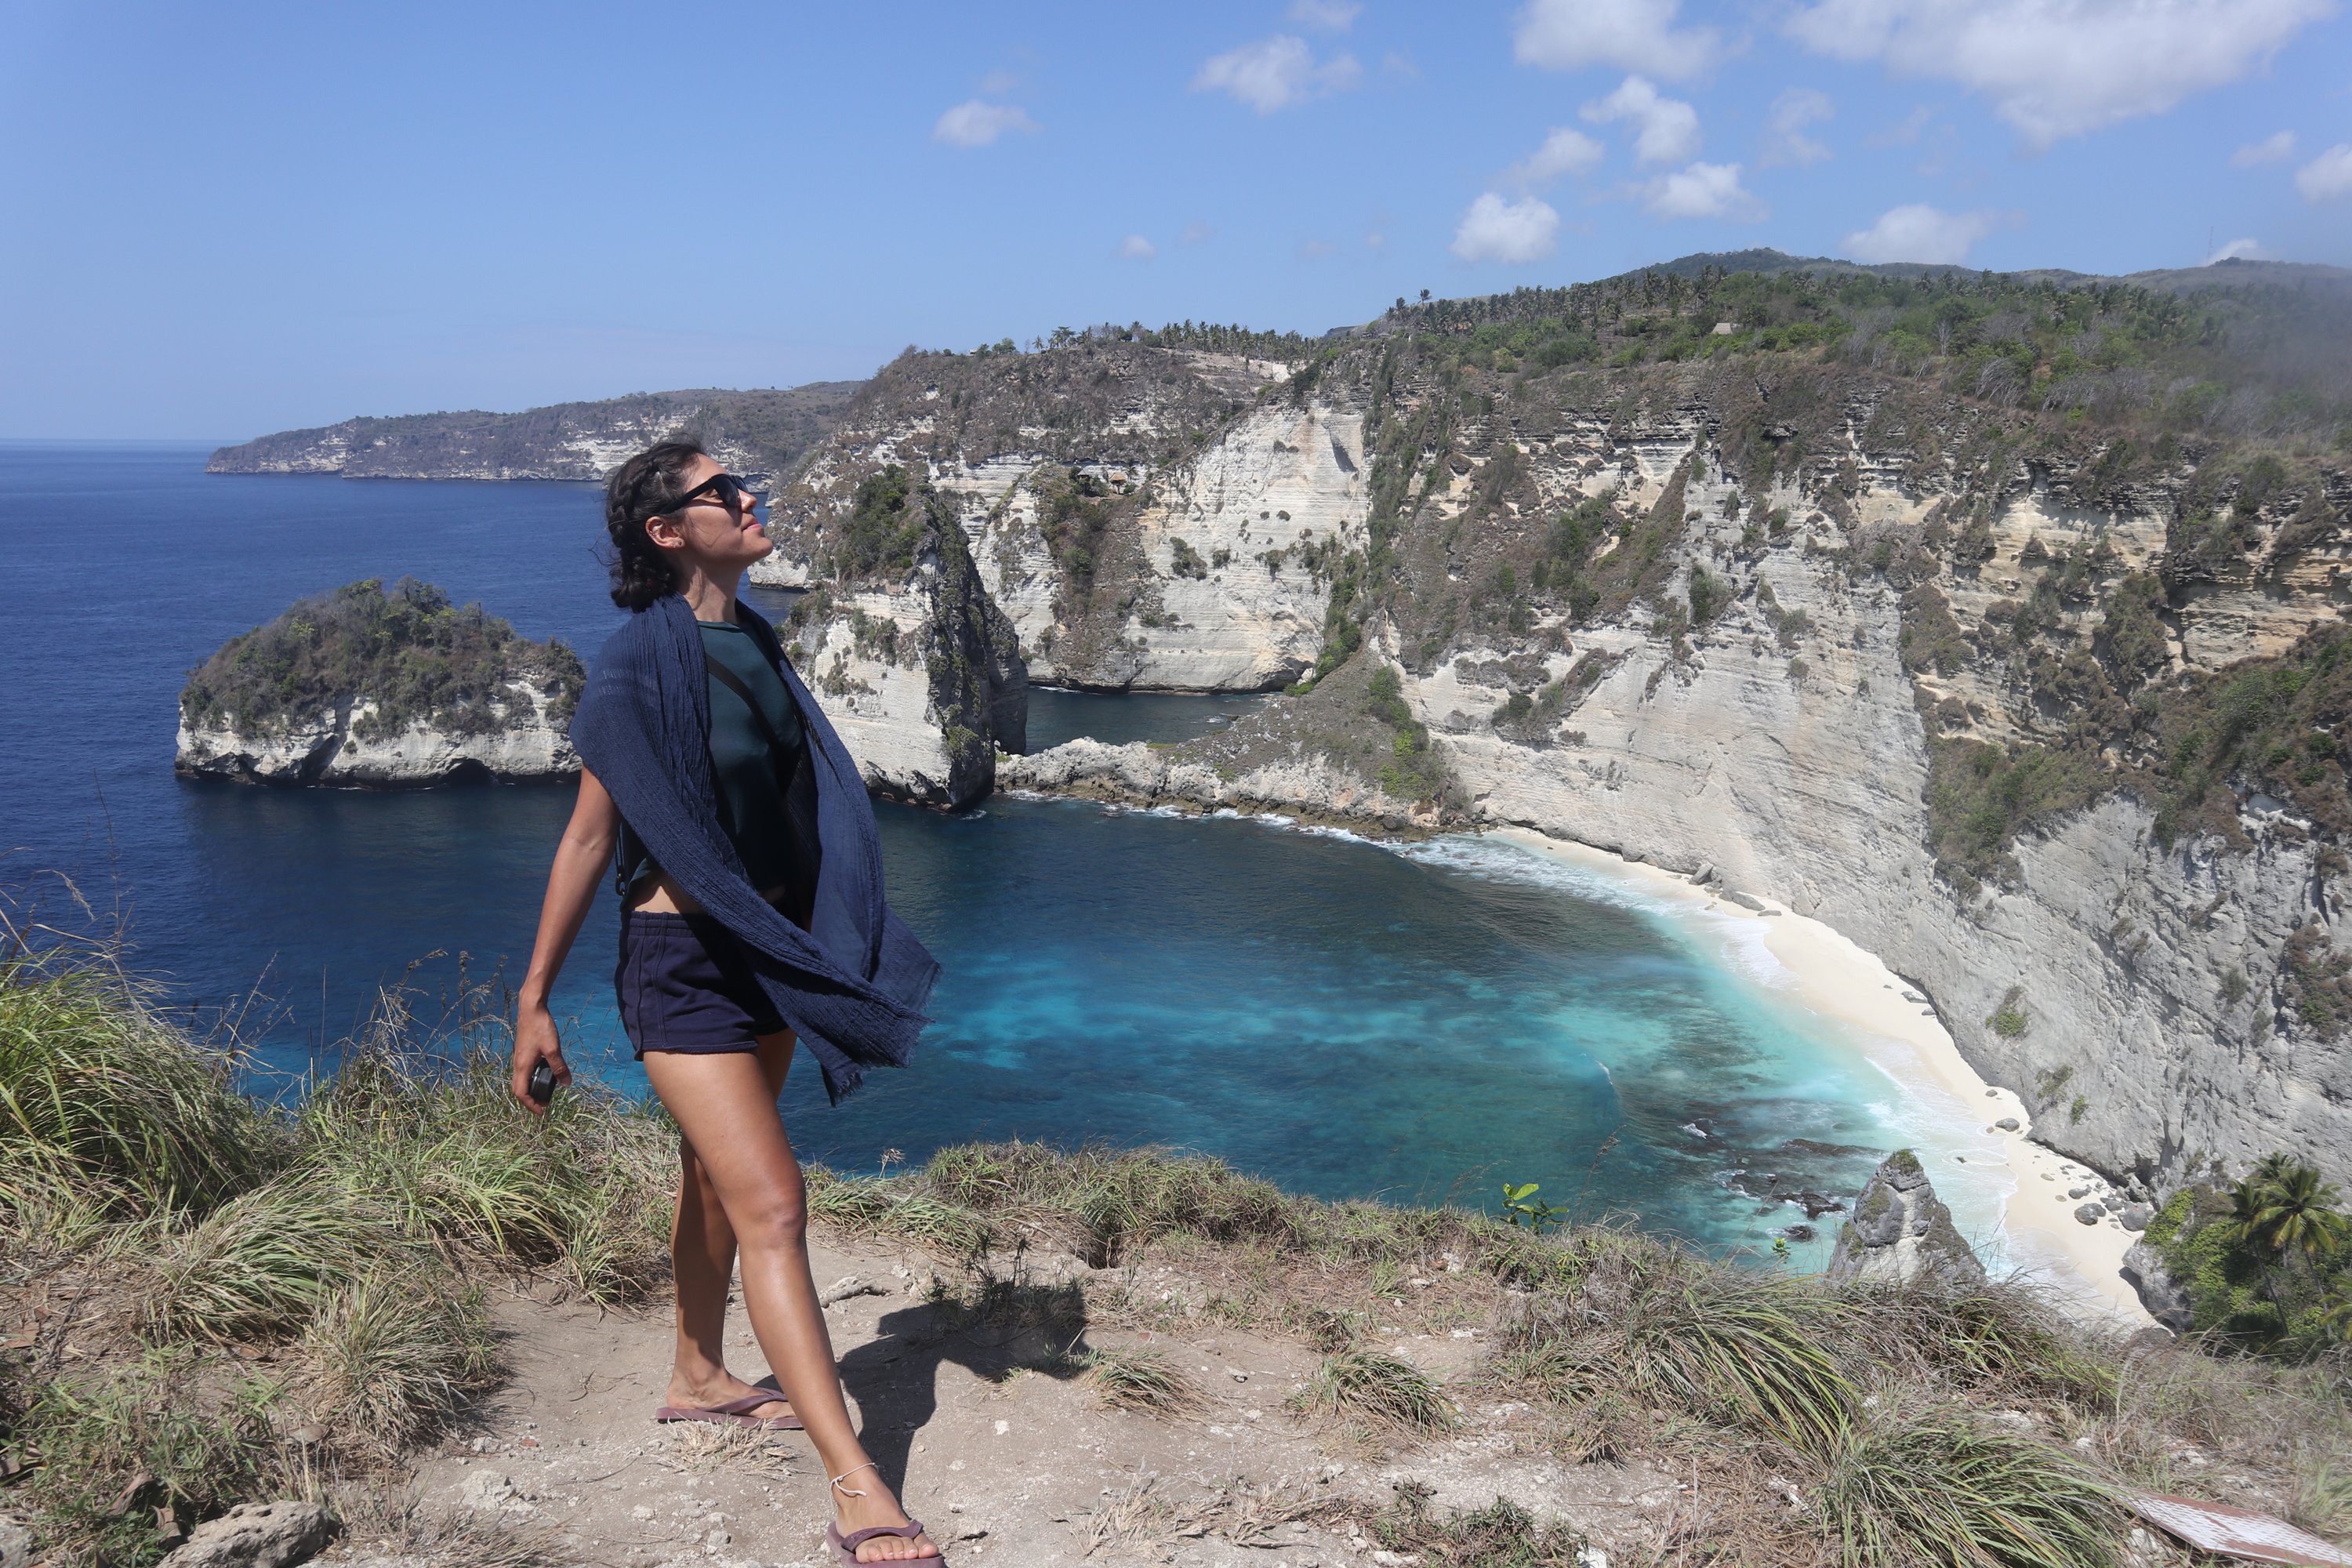 This place is amazing, the blue is incredible, and the view unbelievable. Atuh beach , Nusa Penida Island, Indonesia, South East Asia. 